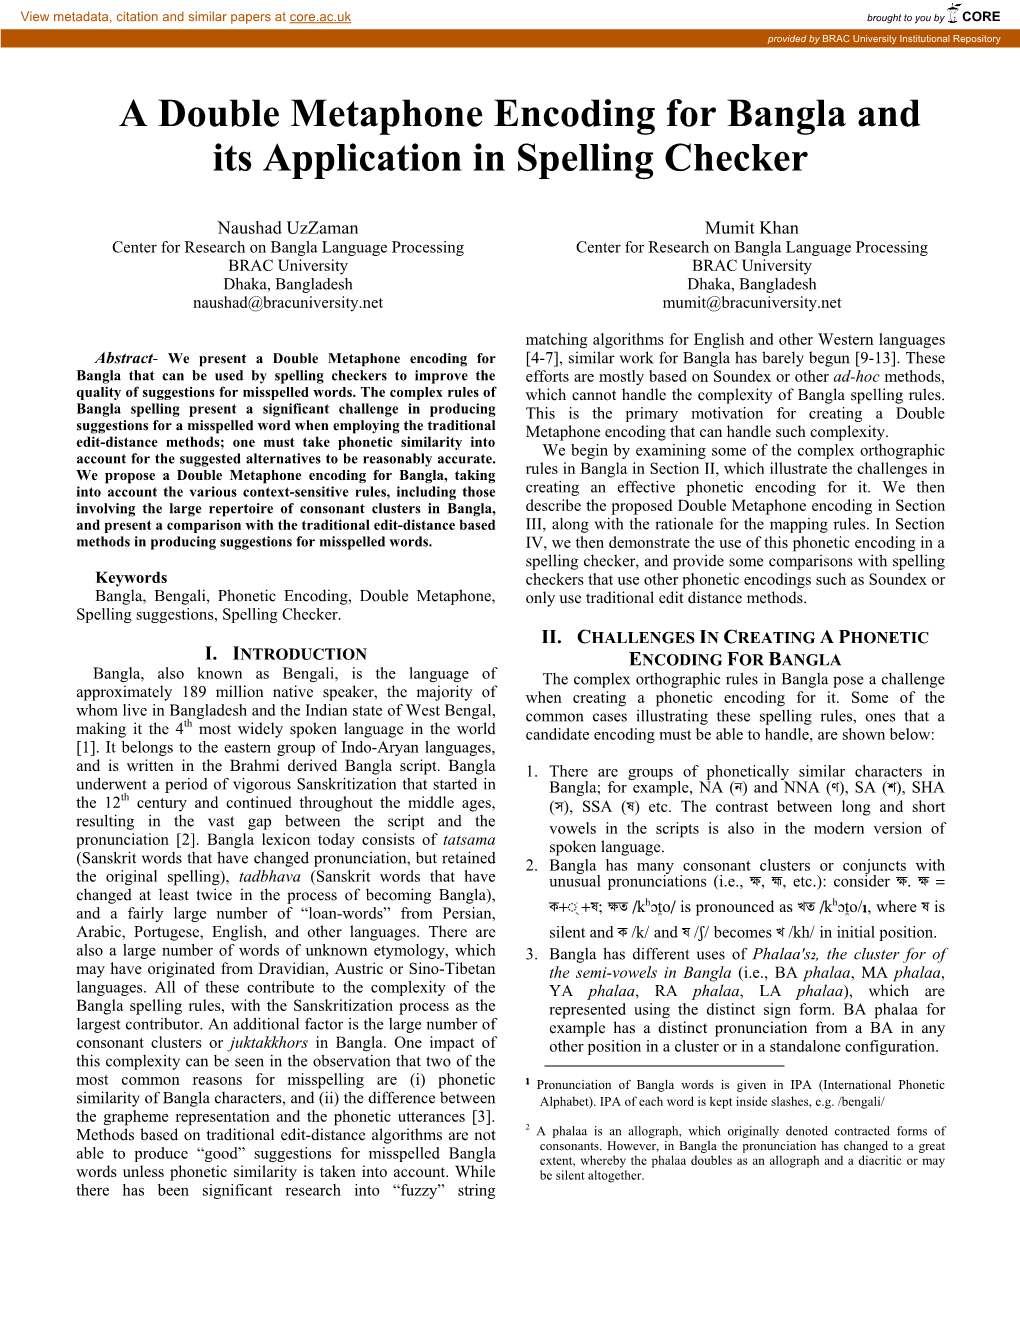 A Double Metaphone Encoding for Bangla and Its Application in Spelling Checker